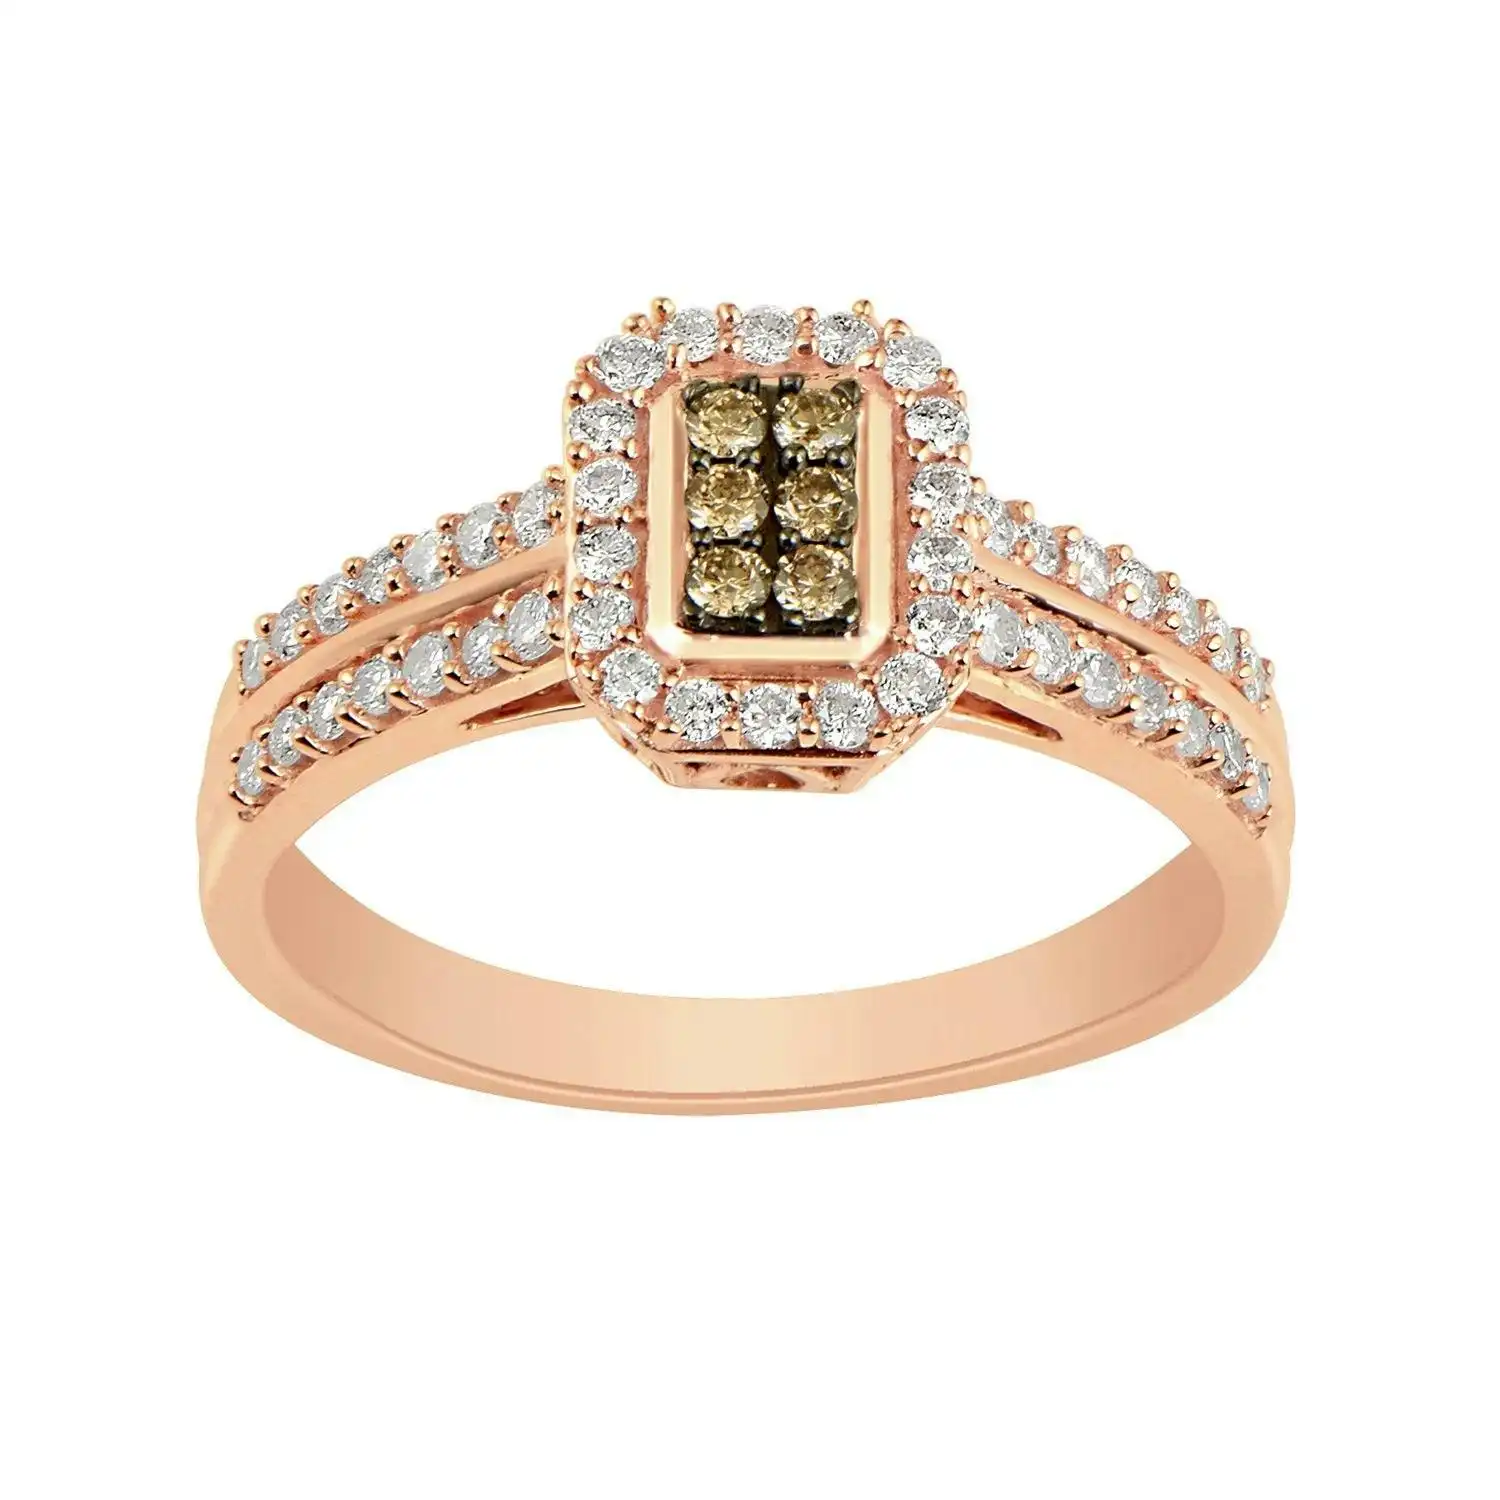 Emerald Shape Halo Ring with 0.35ct of Diamonds in 9ct Rose Gold